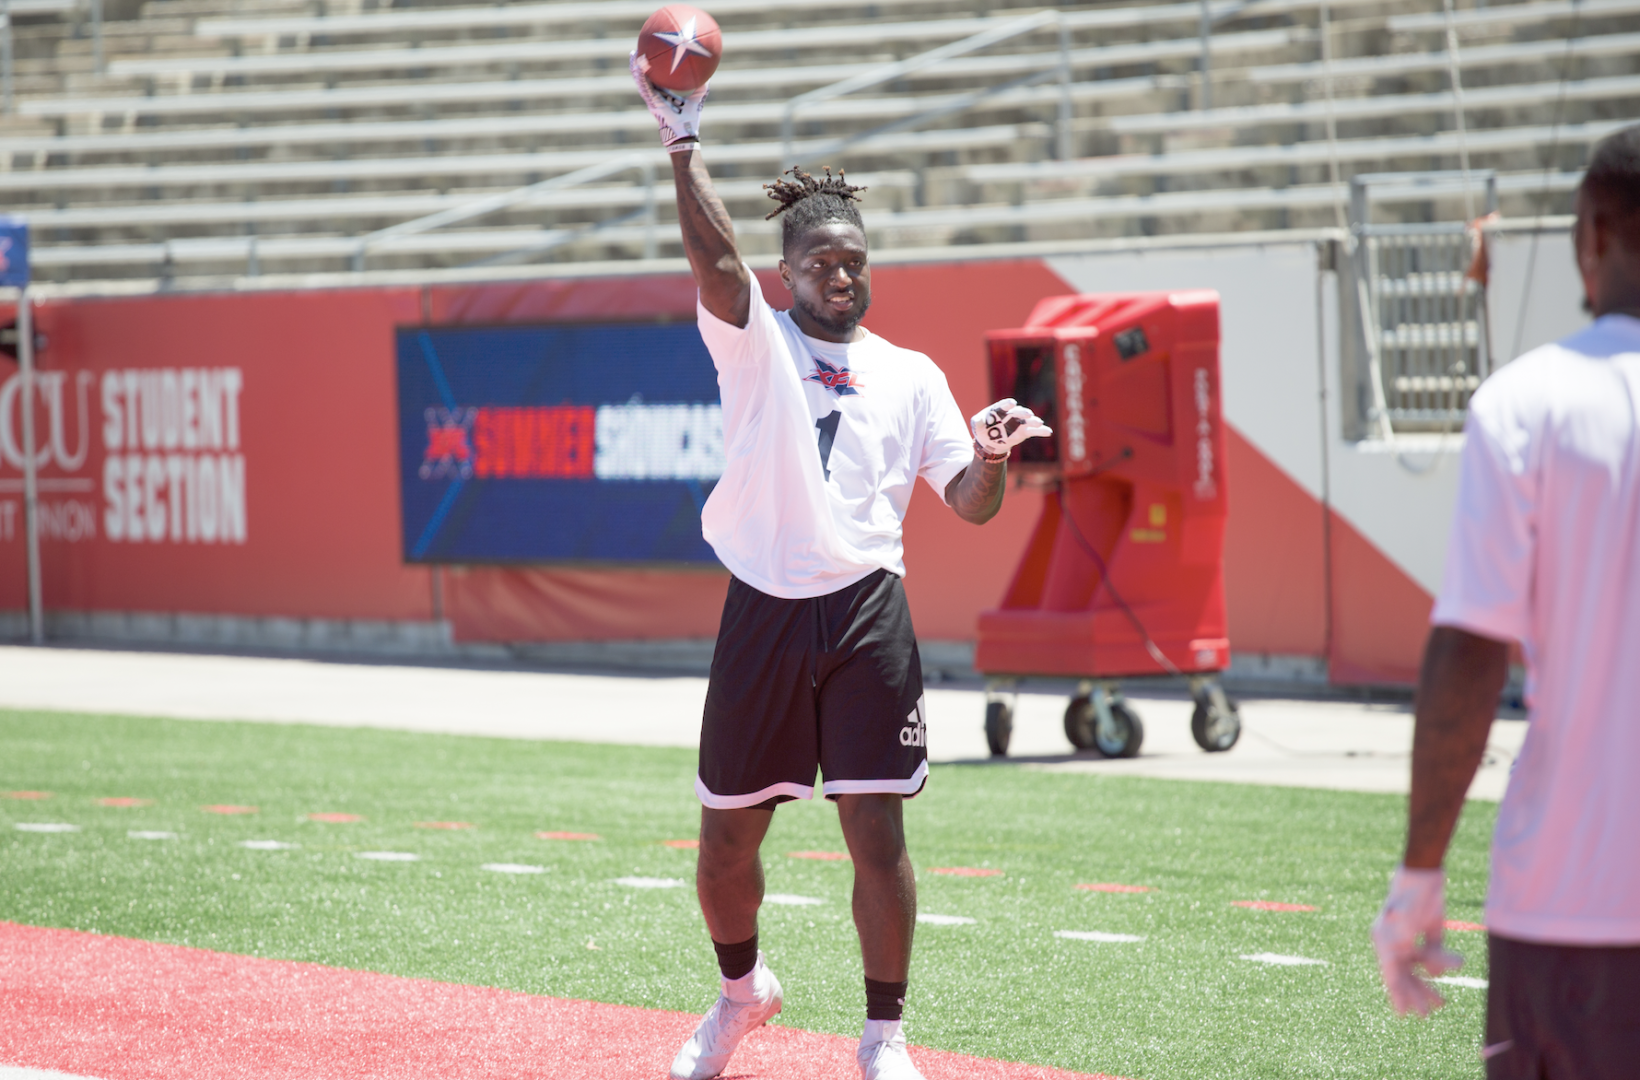 Wide receiver Demarcus Ayers was among eight former Cougars to tryout at the XFL Houston Summer Showcase. | Trevor Nolley/The Cougar